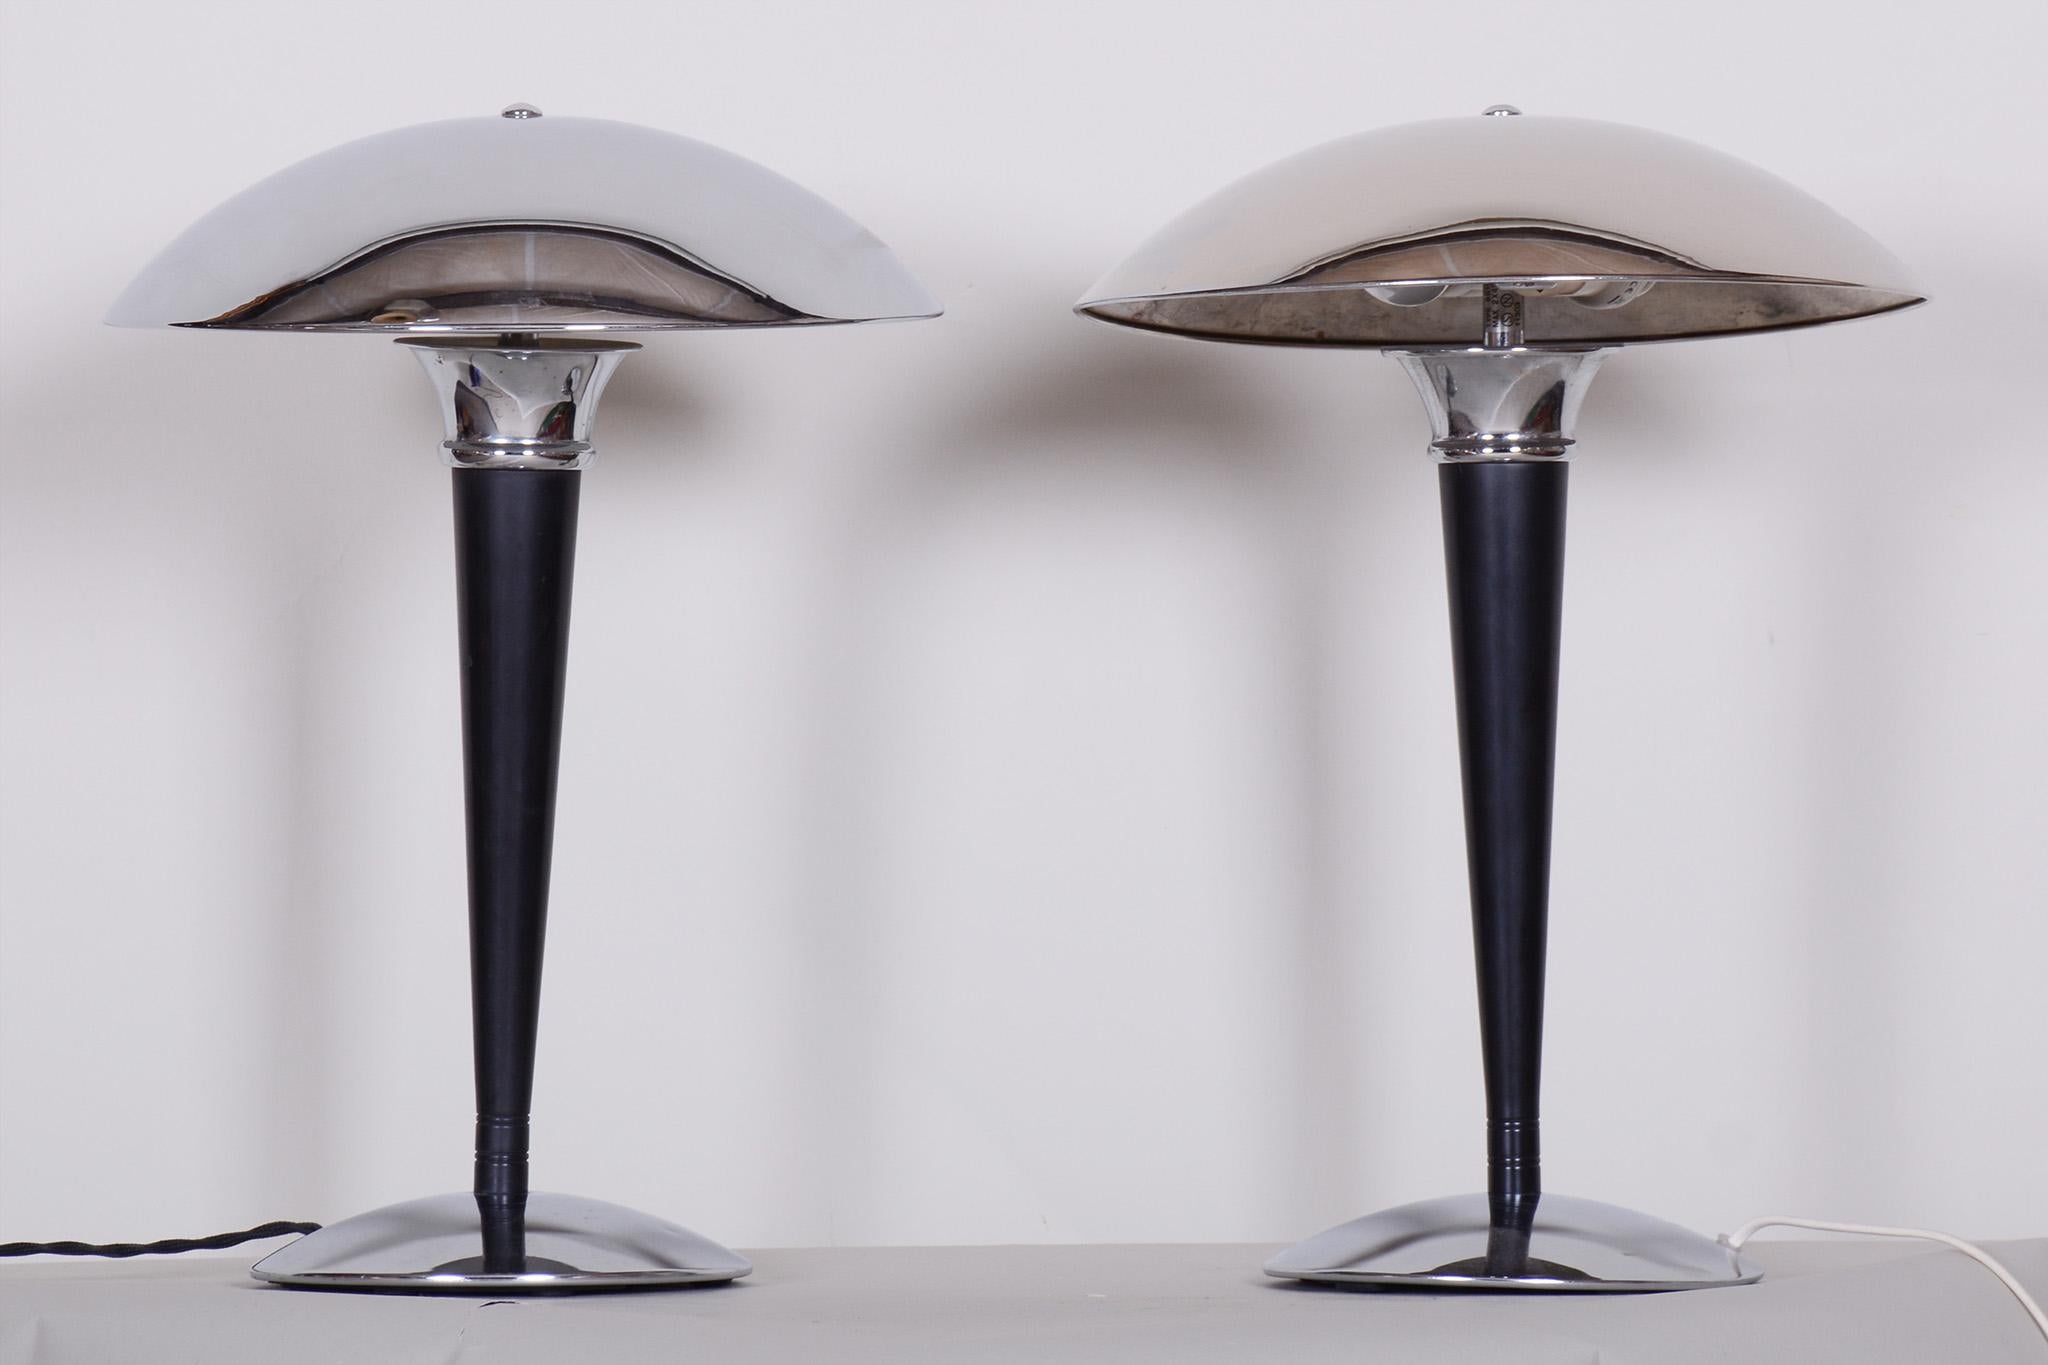 Pair of Midcentury Black Table Lamps, Chrome-Plated Steel, Germany, 1950s 1